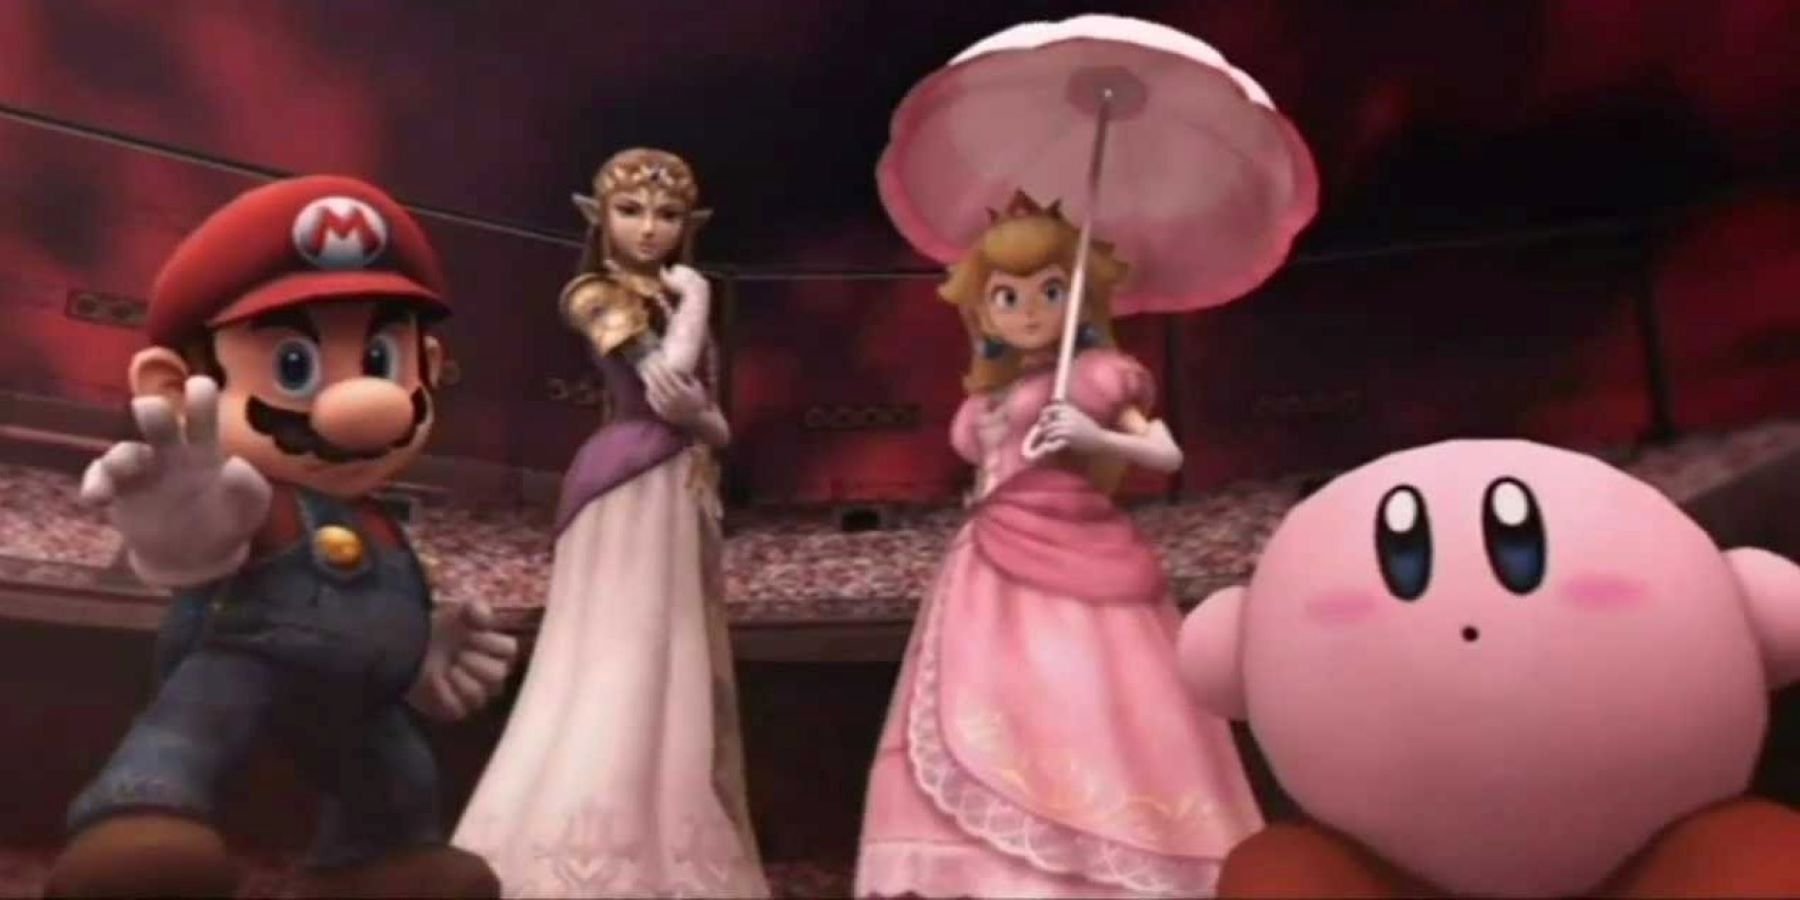 Mario, Zelda, Peach, and Kirby standing together at the beginning of Super Smash Bros. Brawl's Subspace Emissary